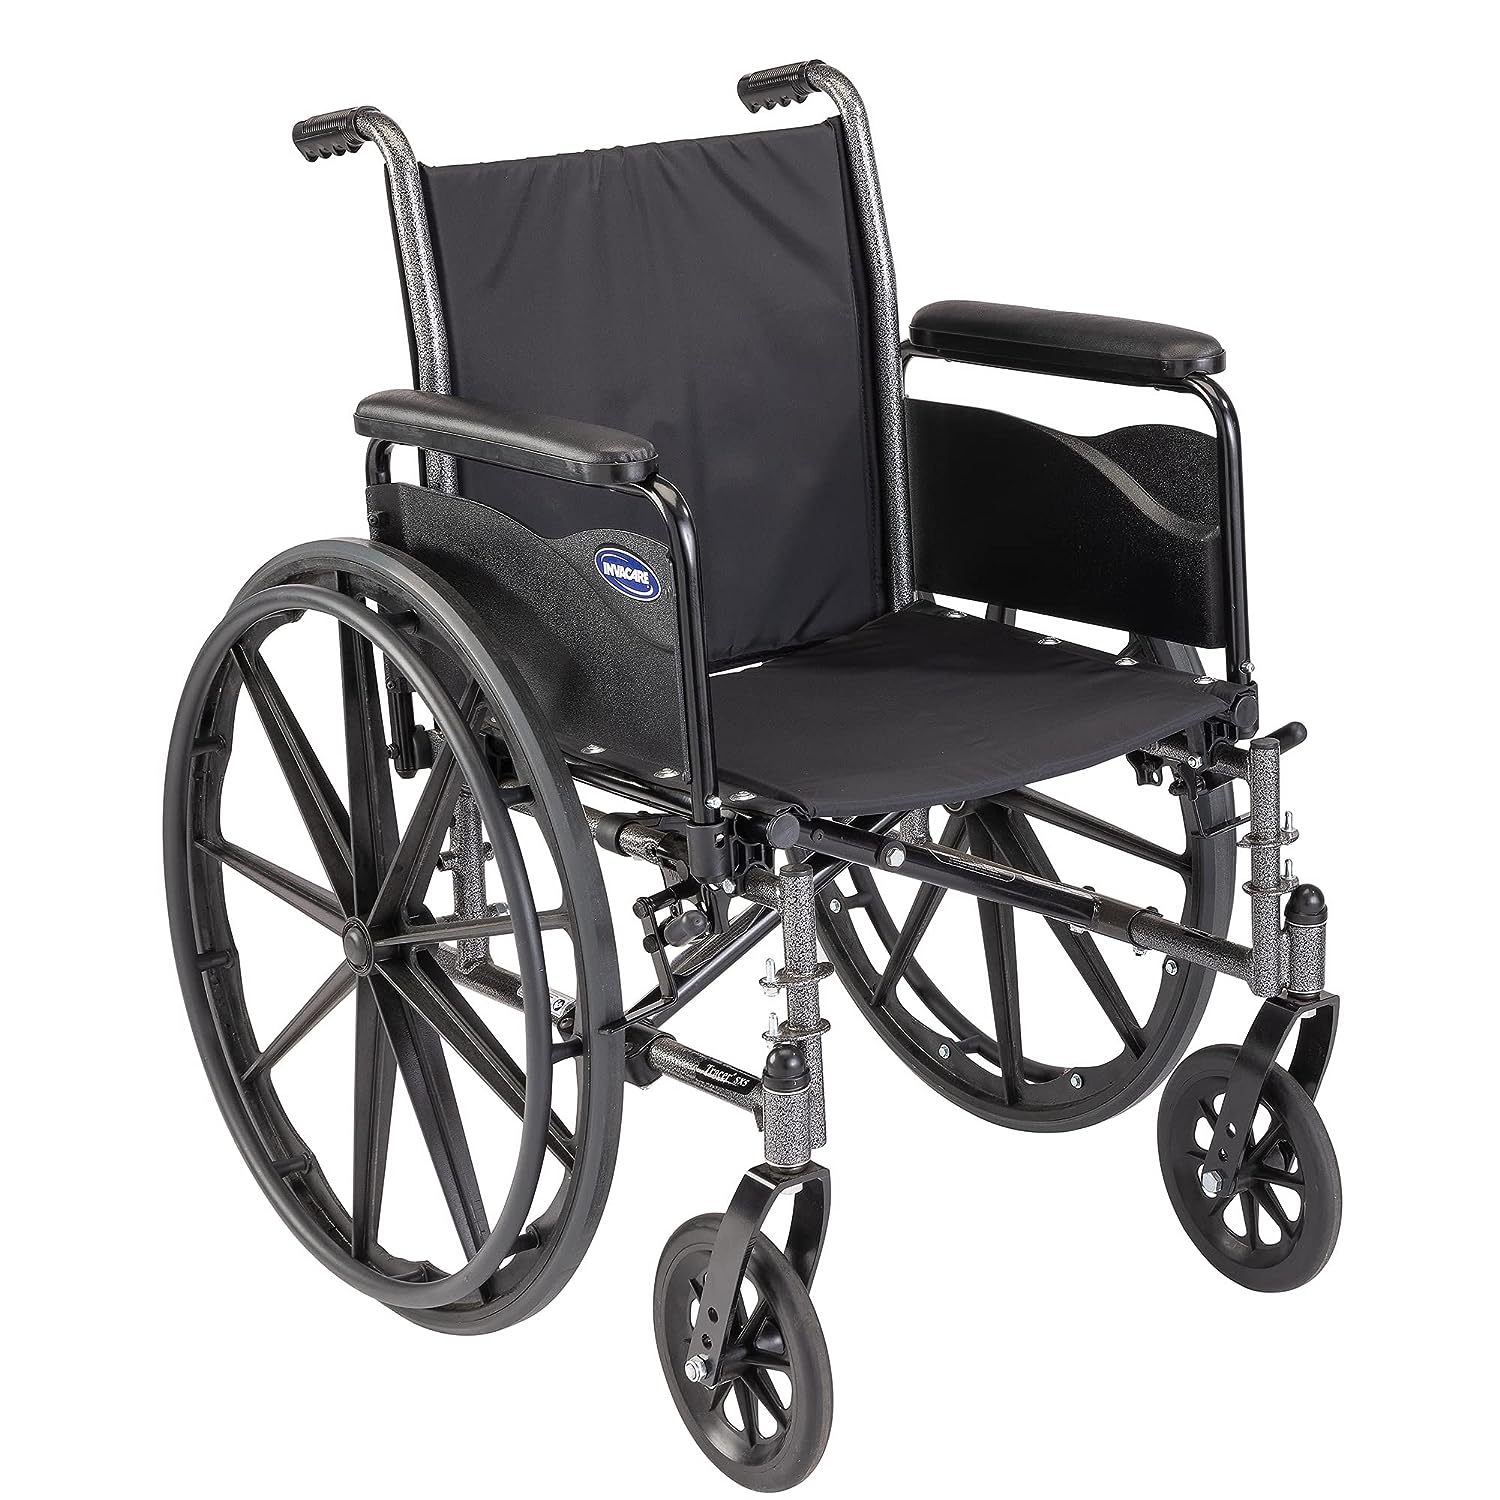 Invacare's Tracer SX5 wheelchair for adults with full-length armpads and no footrests.  The image is against a white background.